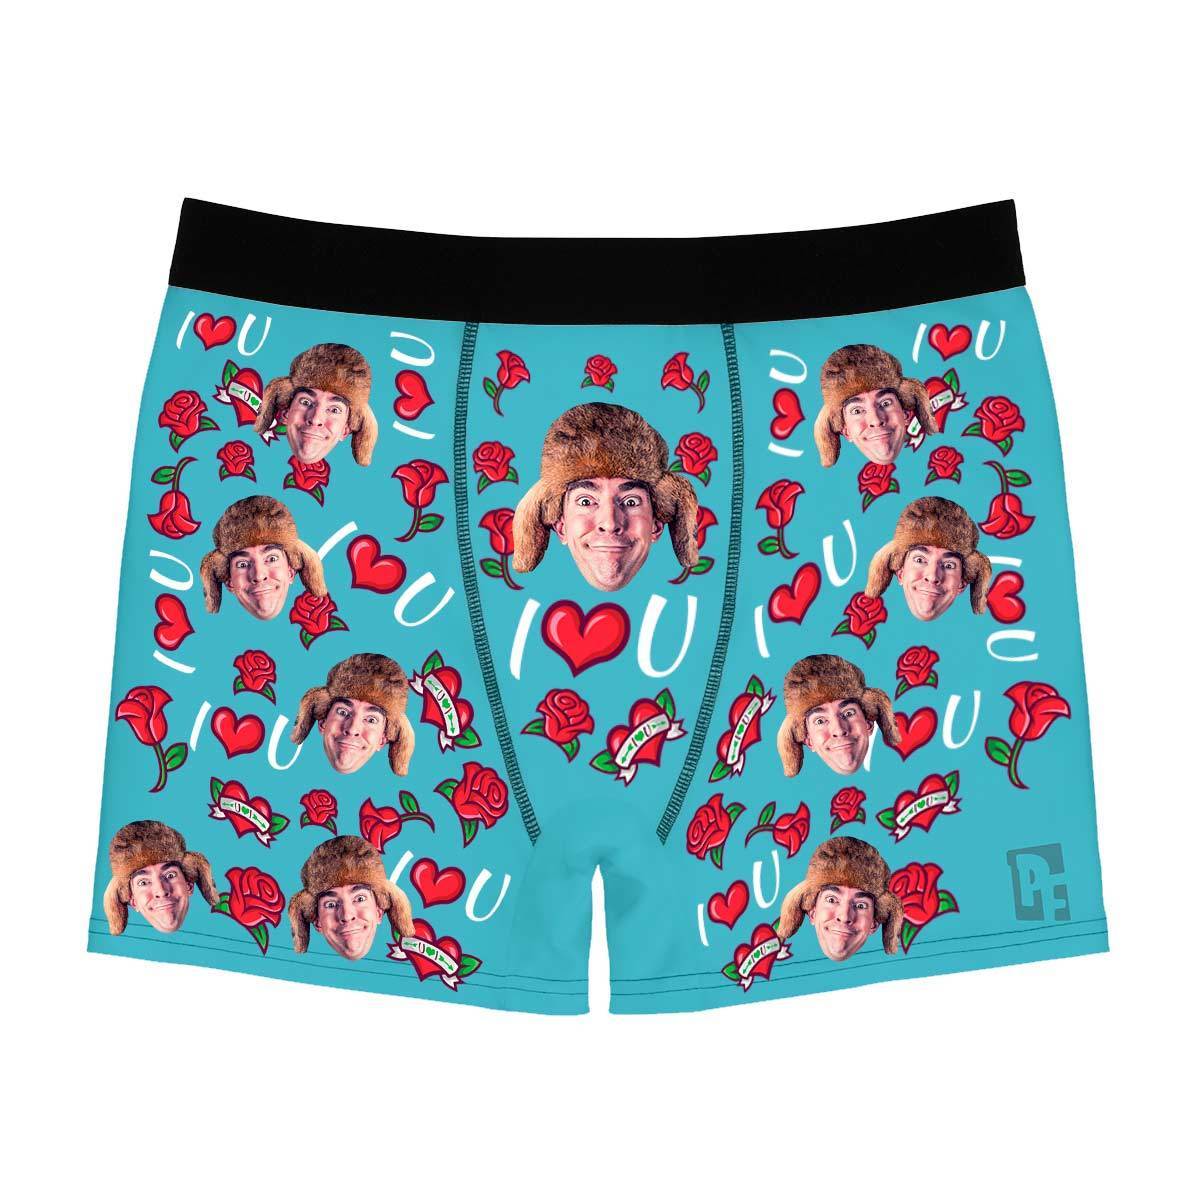 Blue Valentines men's boxer briefs personalized with photo printed on them